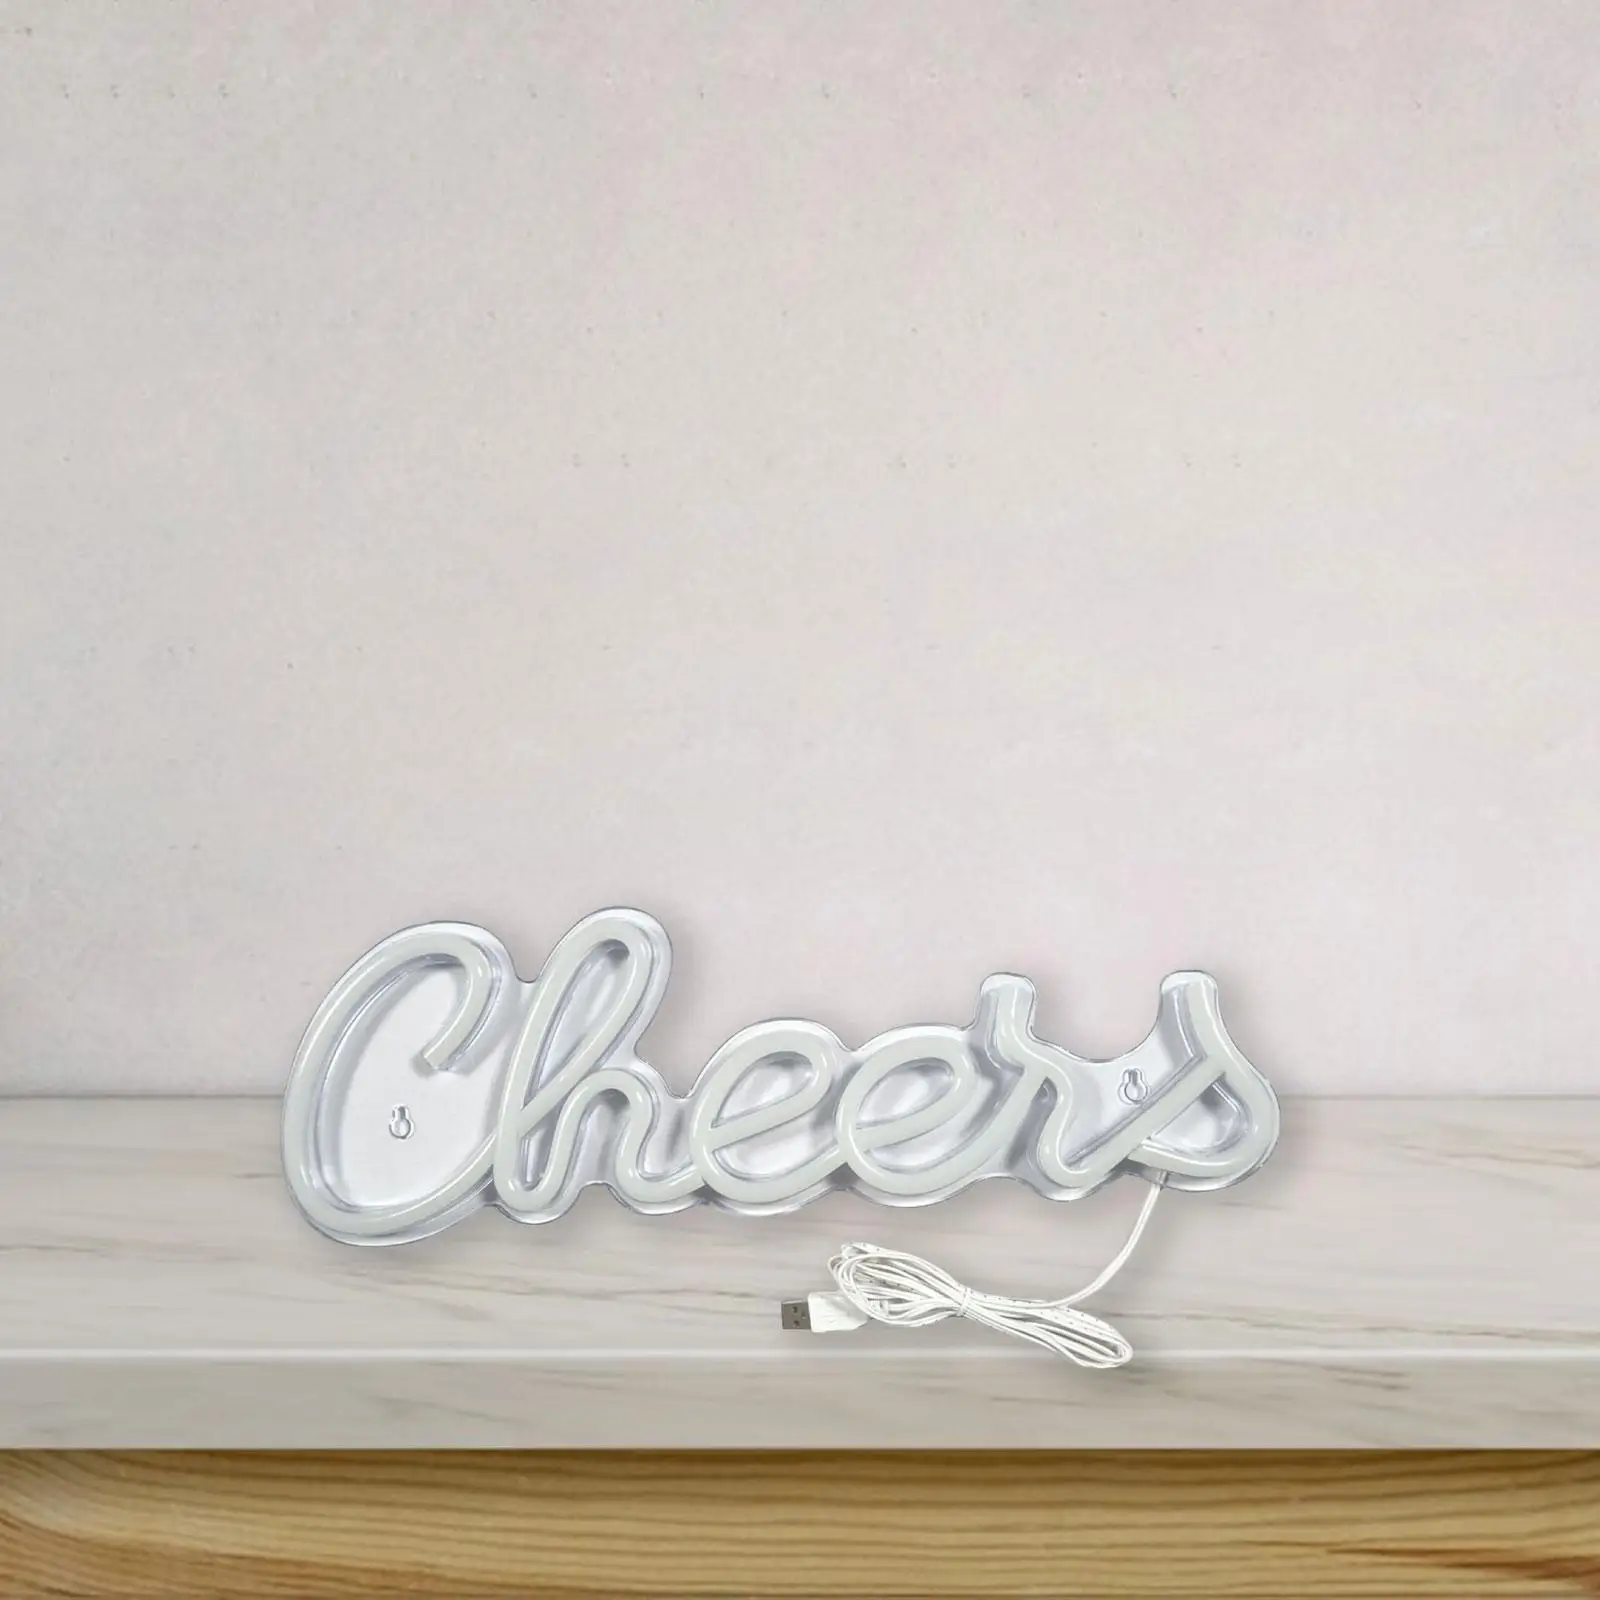 Cheers LED Sign Lighting Display Bar Game Room Lamp Fixture Wall Hanging Neon Club Lights for Outdoor Bedroom Club Party Cafe